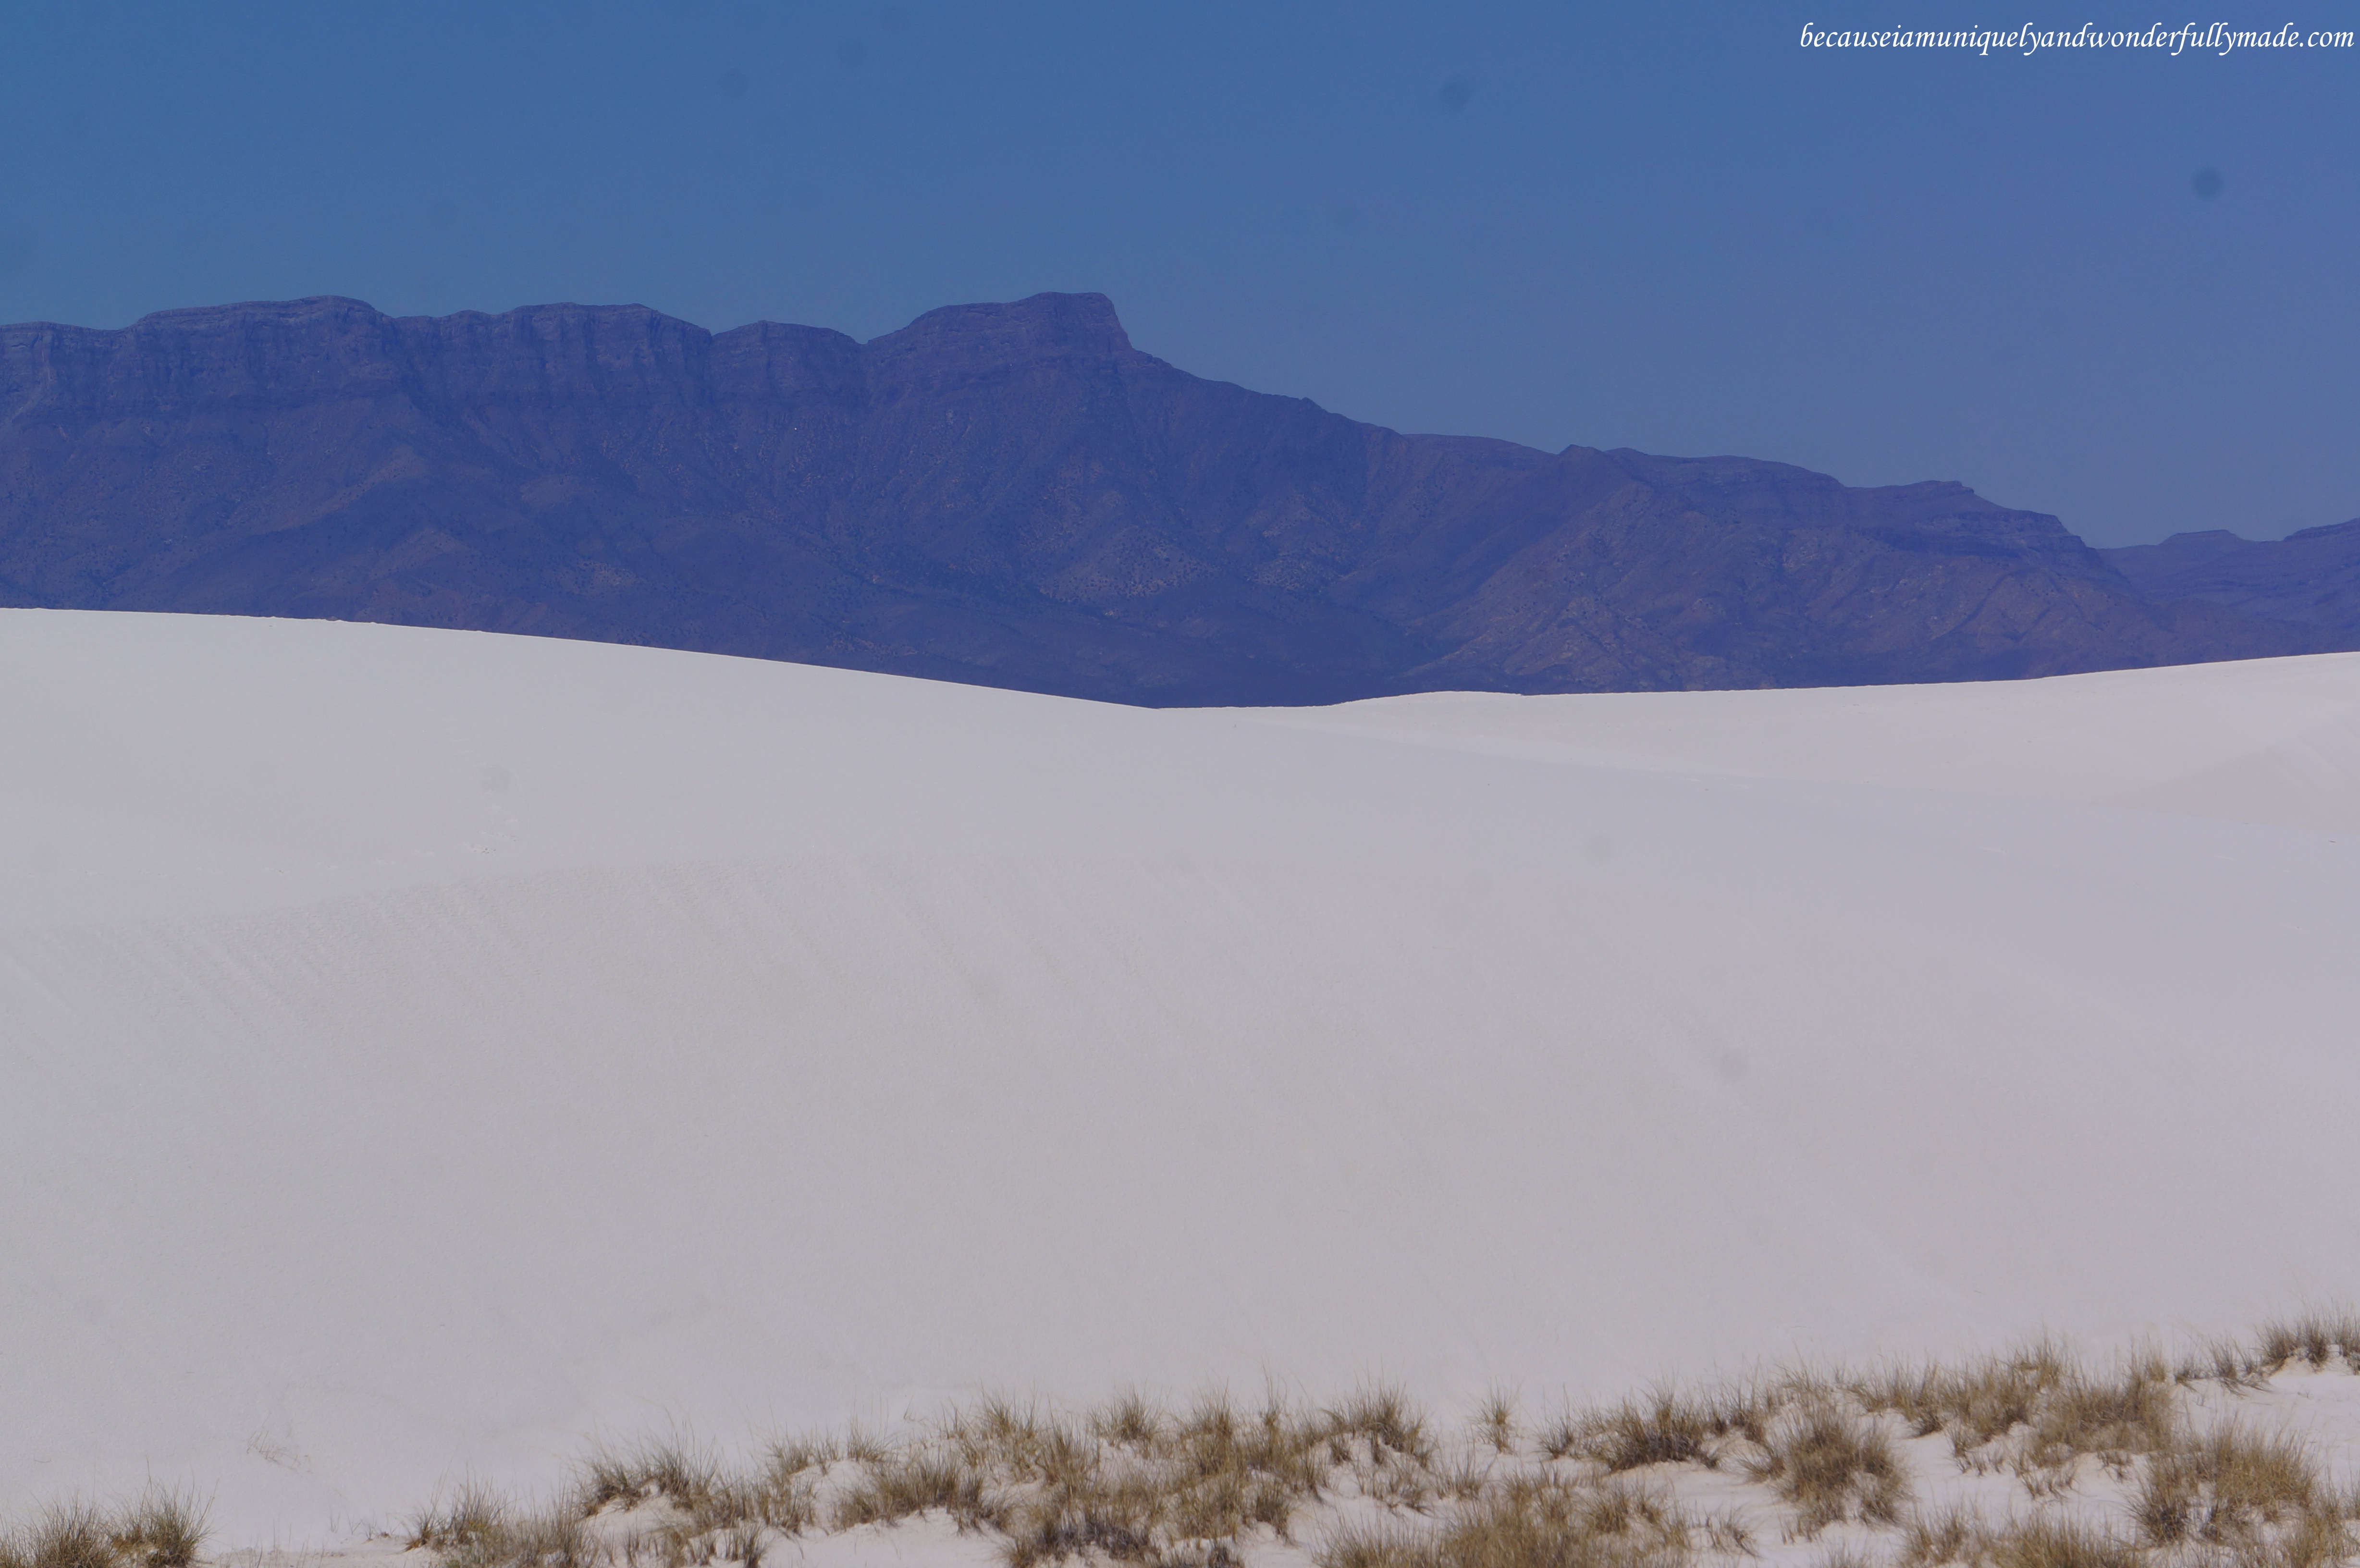 The gypsum (rocks) of New Mexico White Sands National Monument are from the surrounding mountains of the basin - San Andres on the West and Sacramento Mountains on the East.